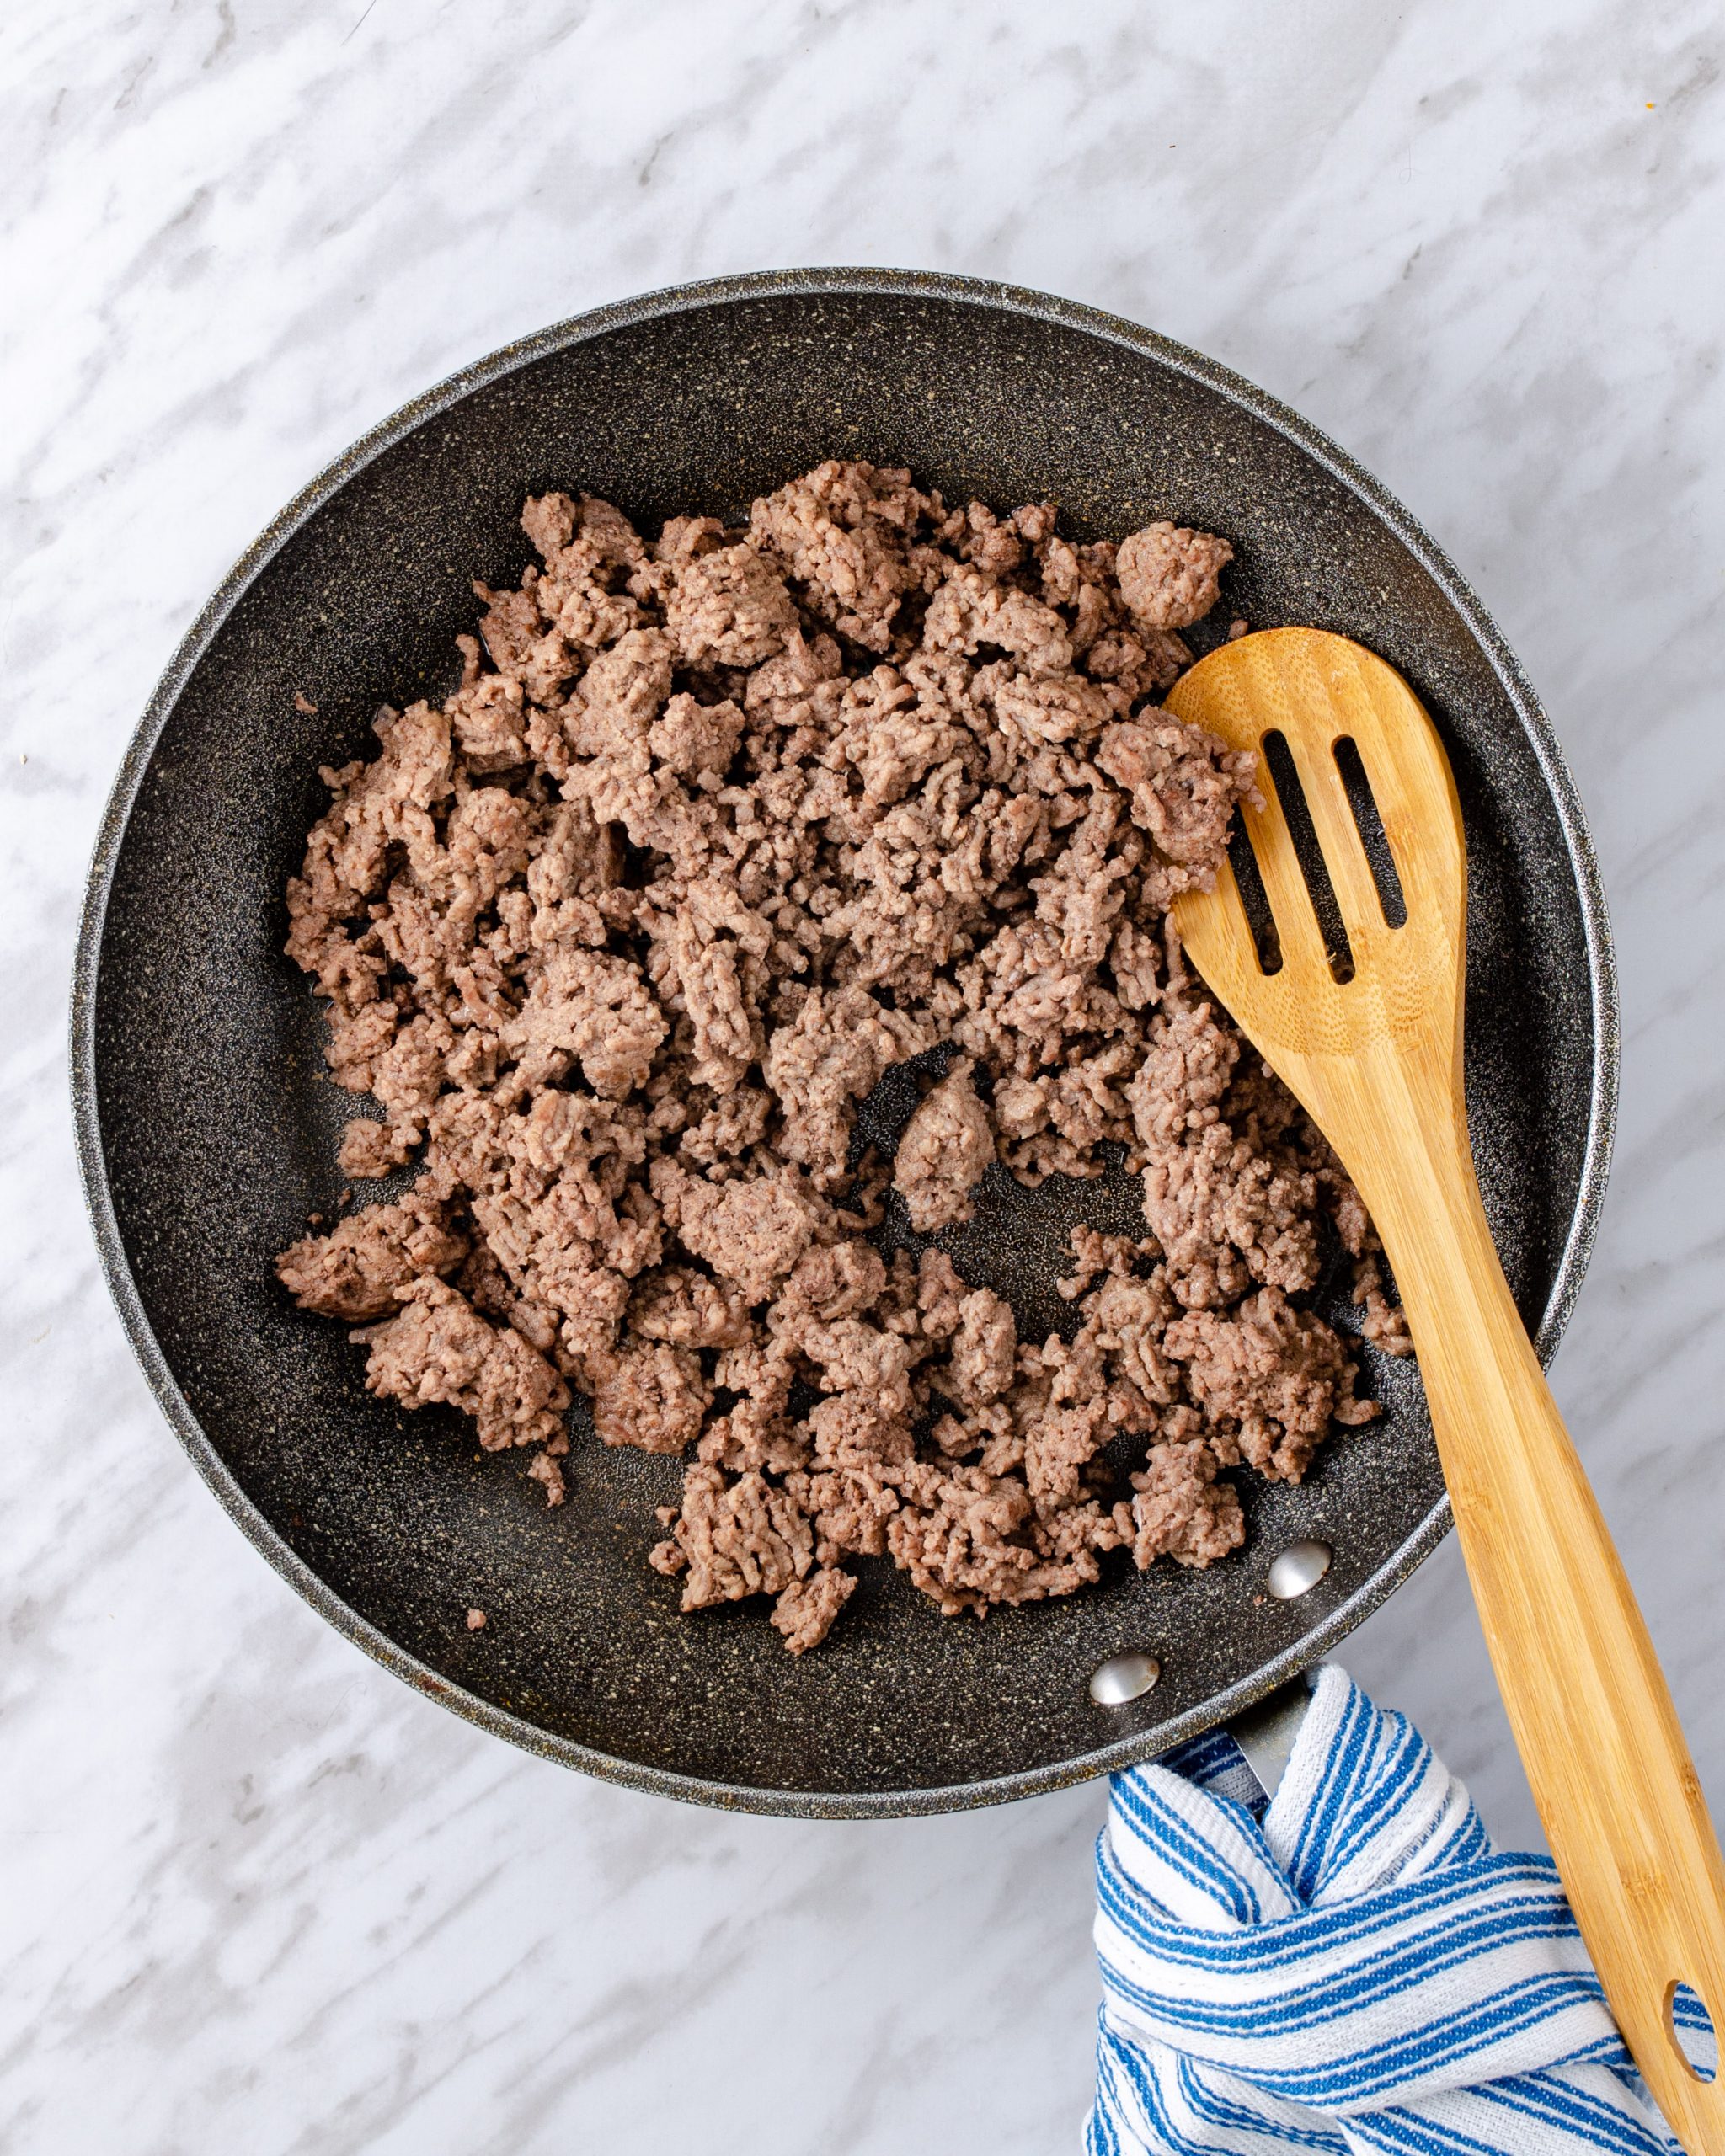 In a large skillet over medium heat, add the ground beef seasoned with salt and pepper and cook until brown.